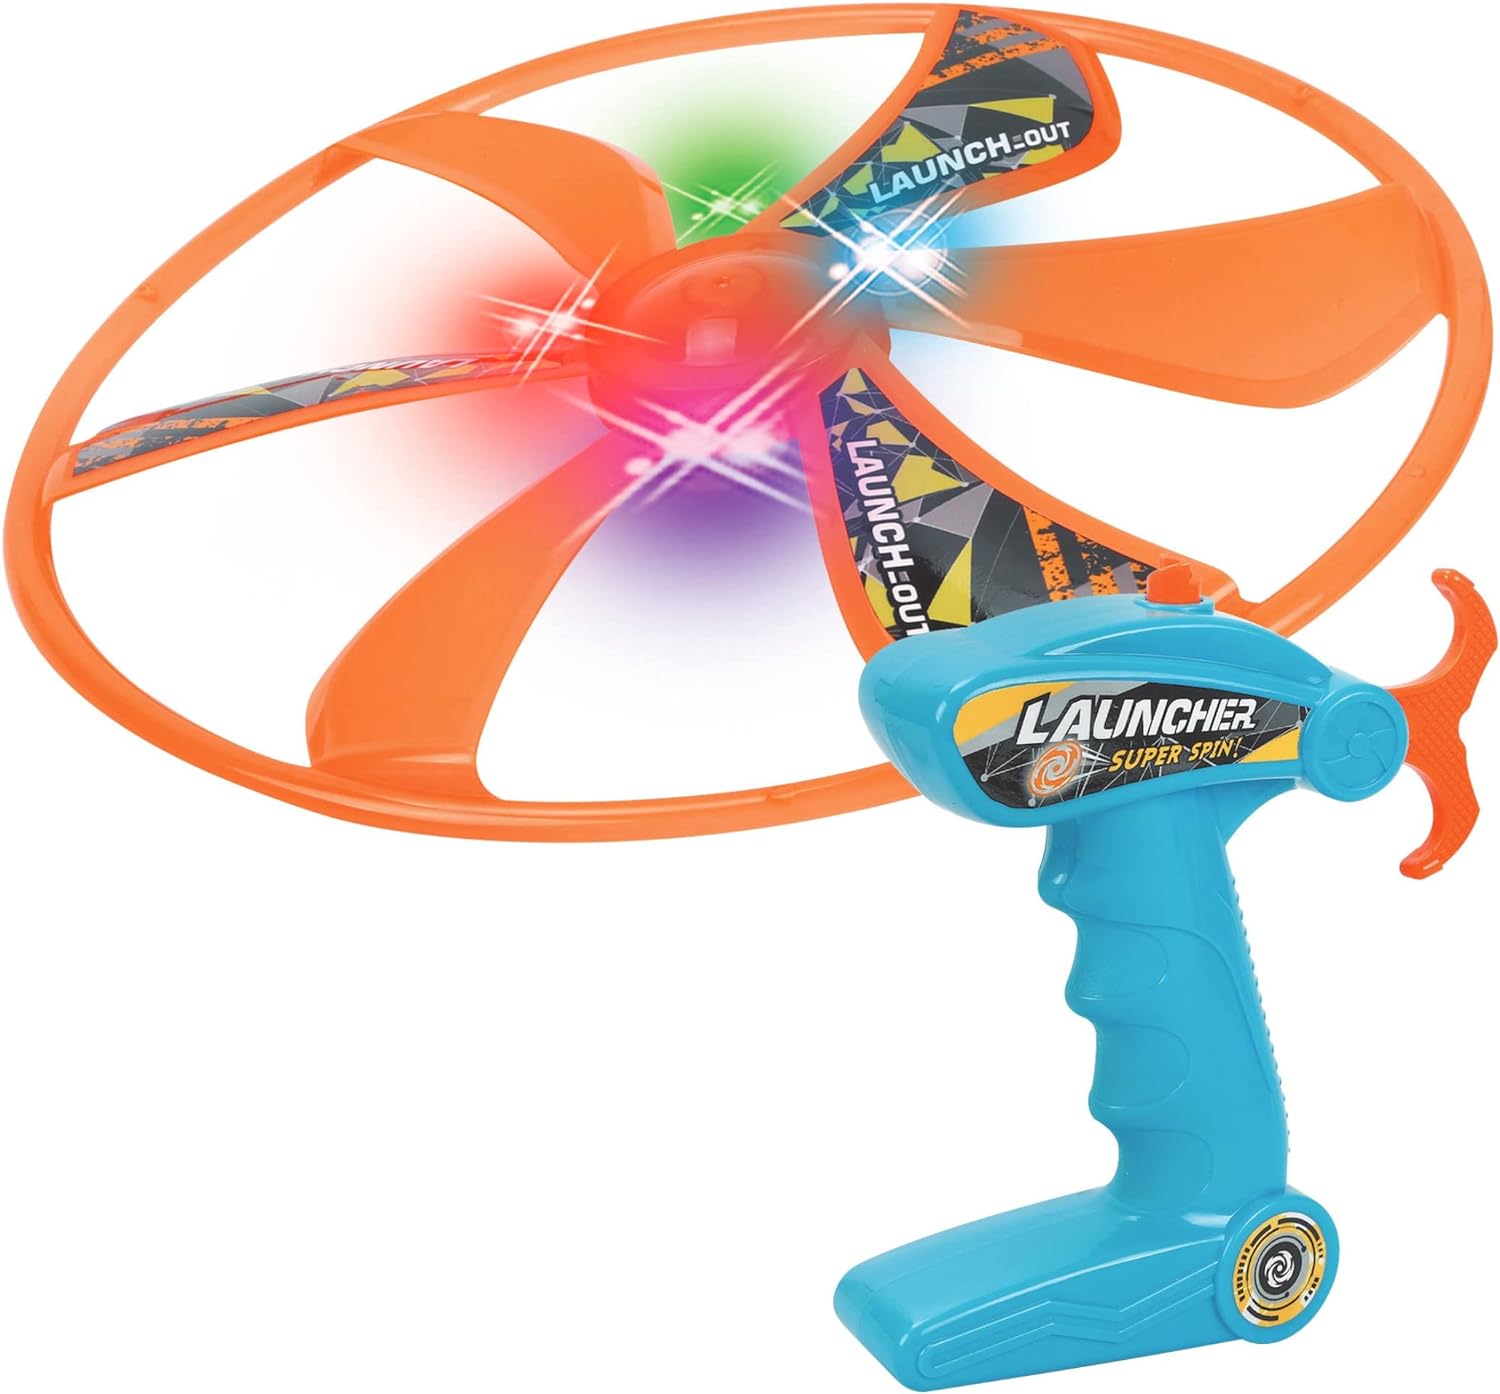 Nothing But Fun Toys Light Up LED Flying Saucer Launcher